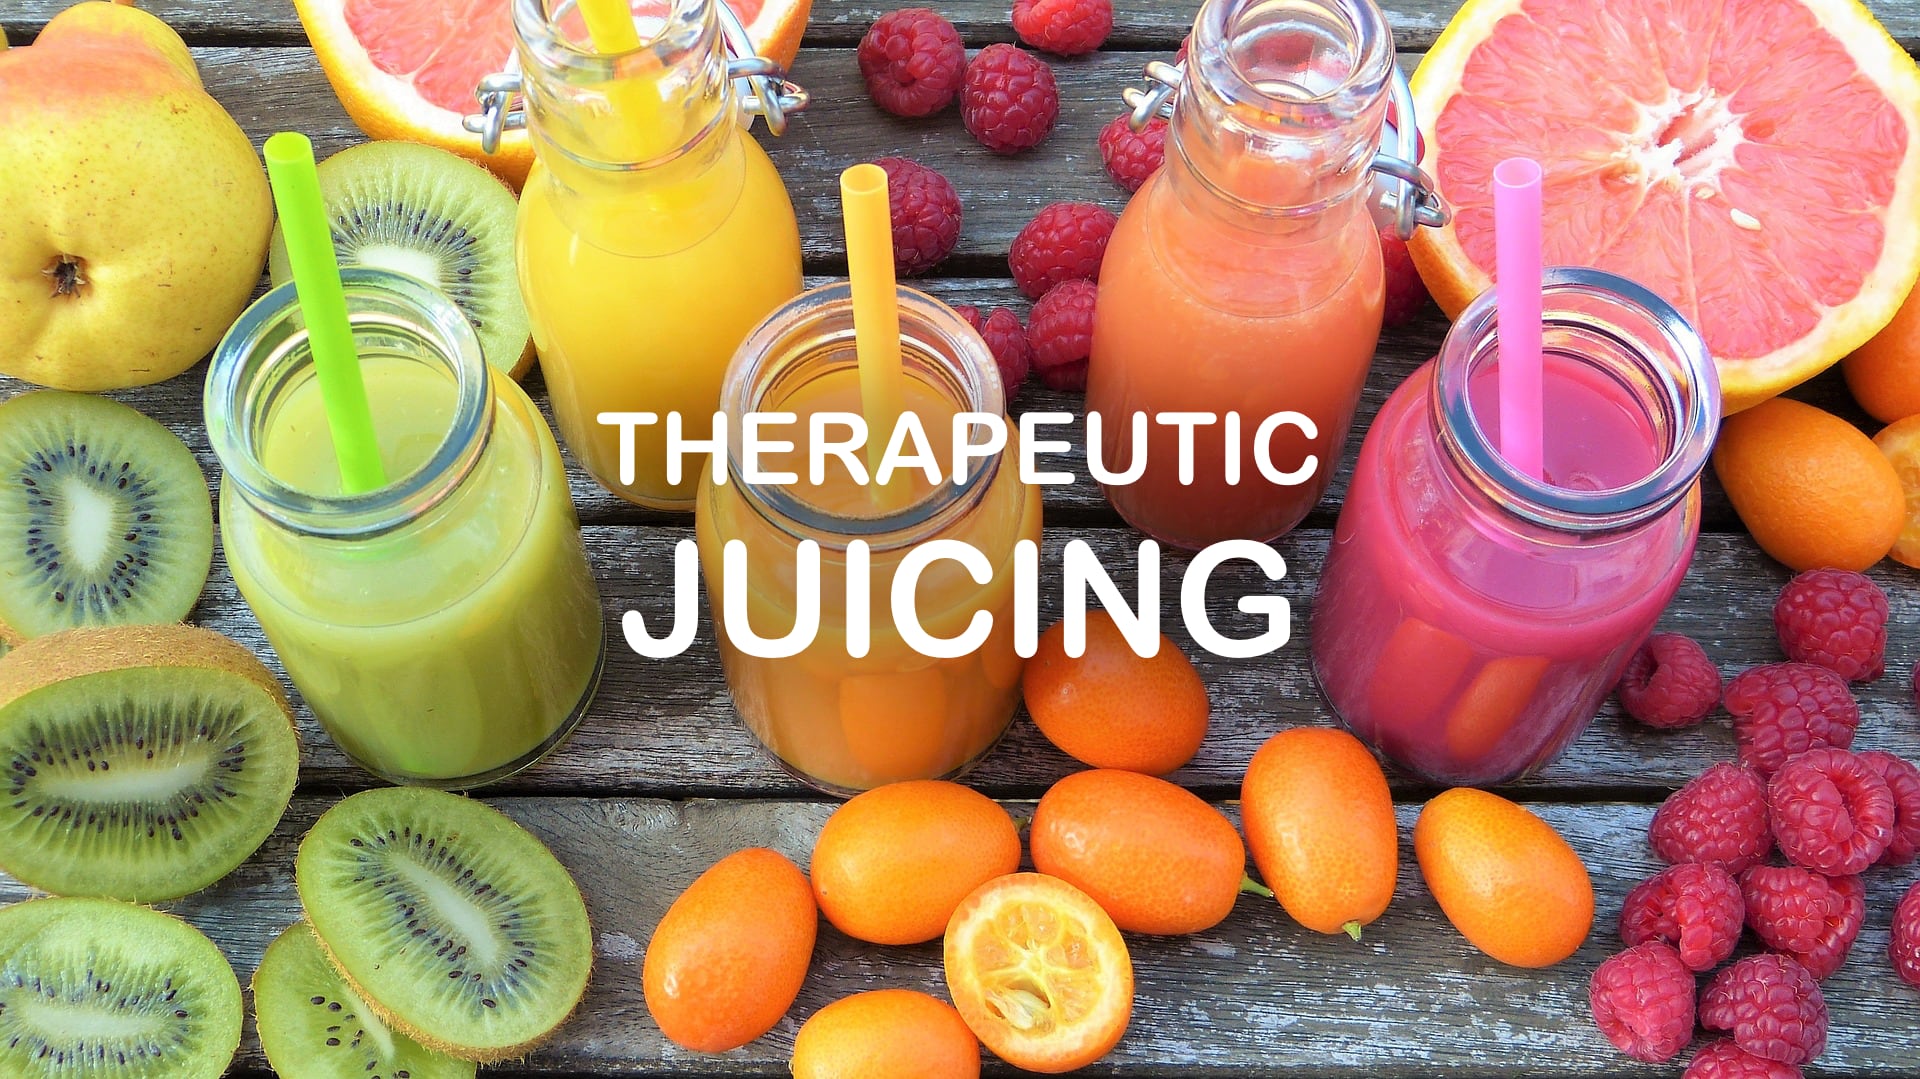 class_Therapeutic Juicing